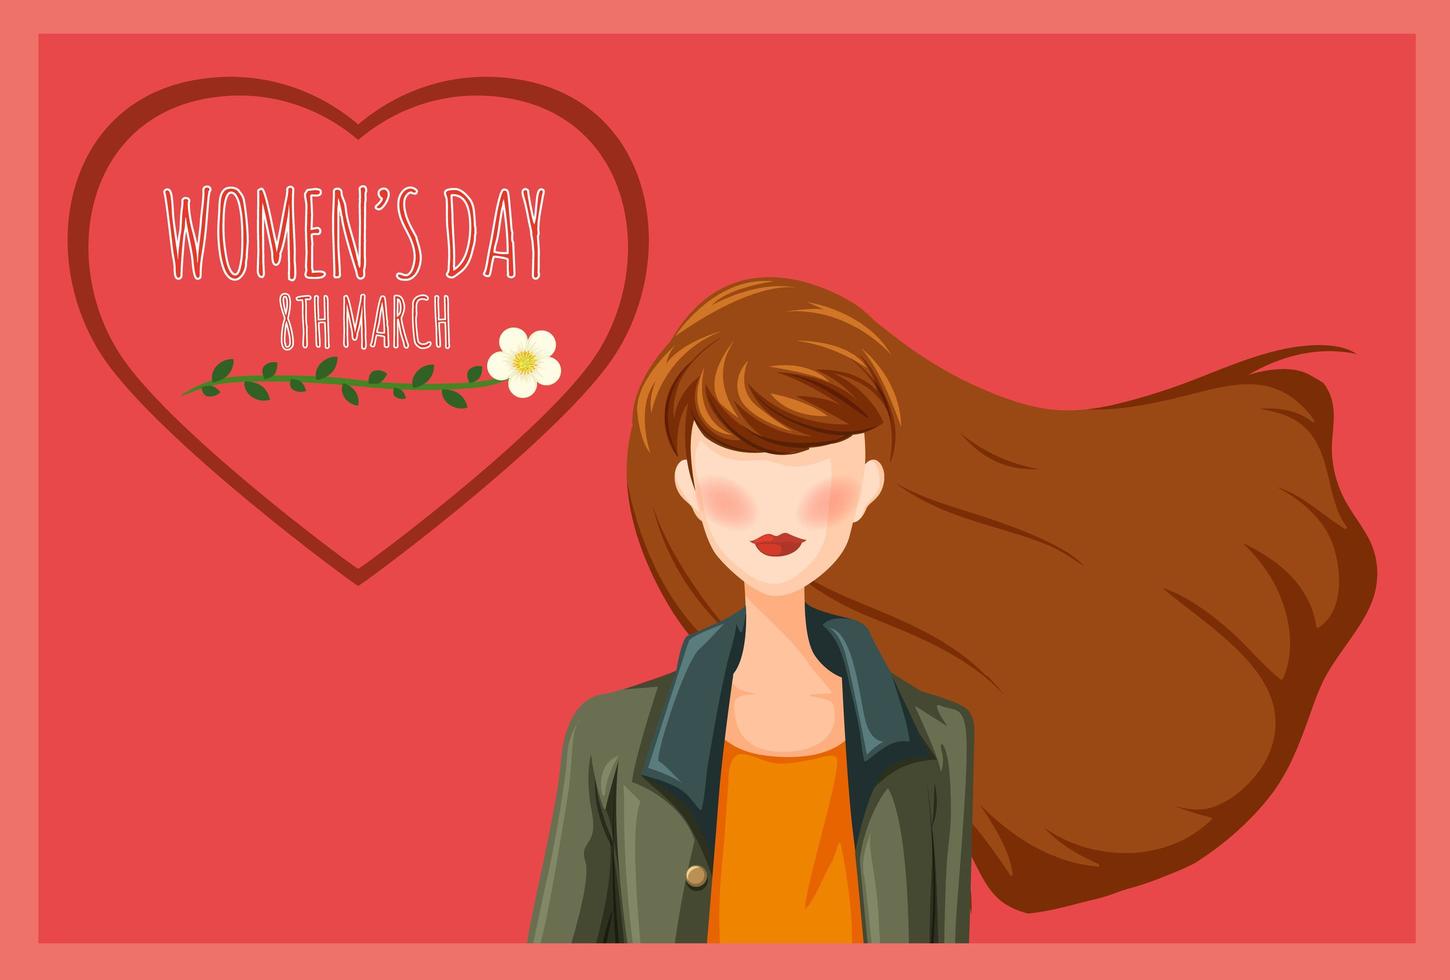 Women's day poster with woman and heart vector